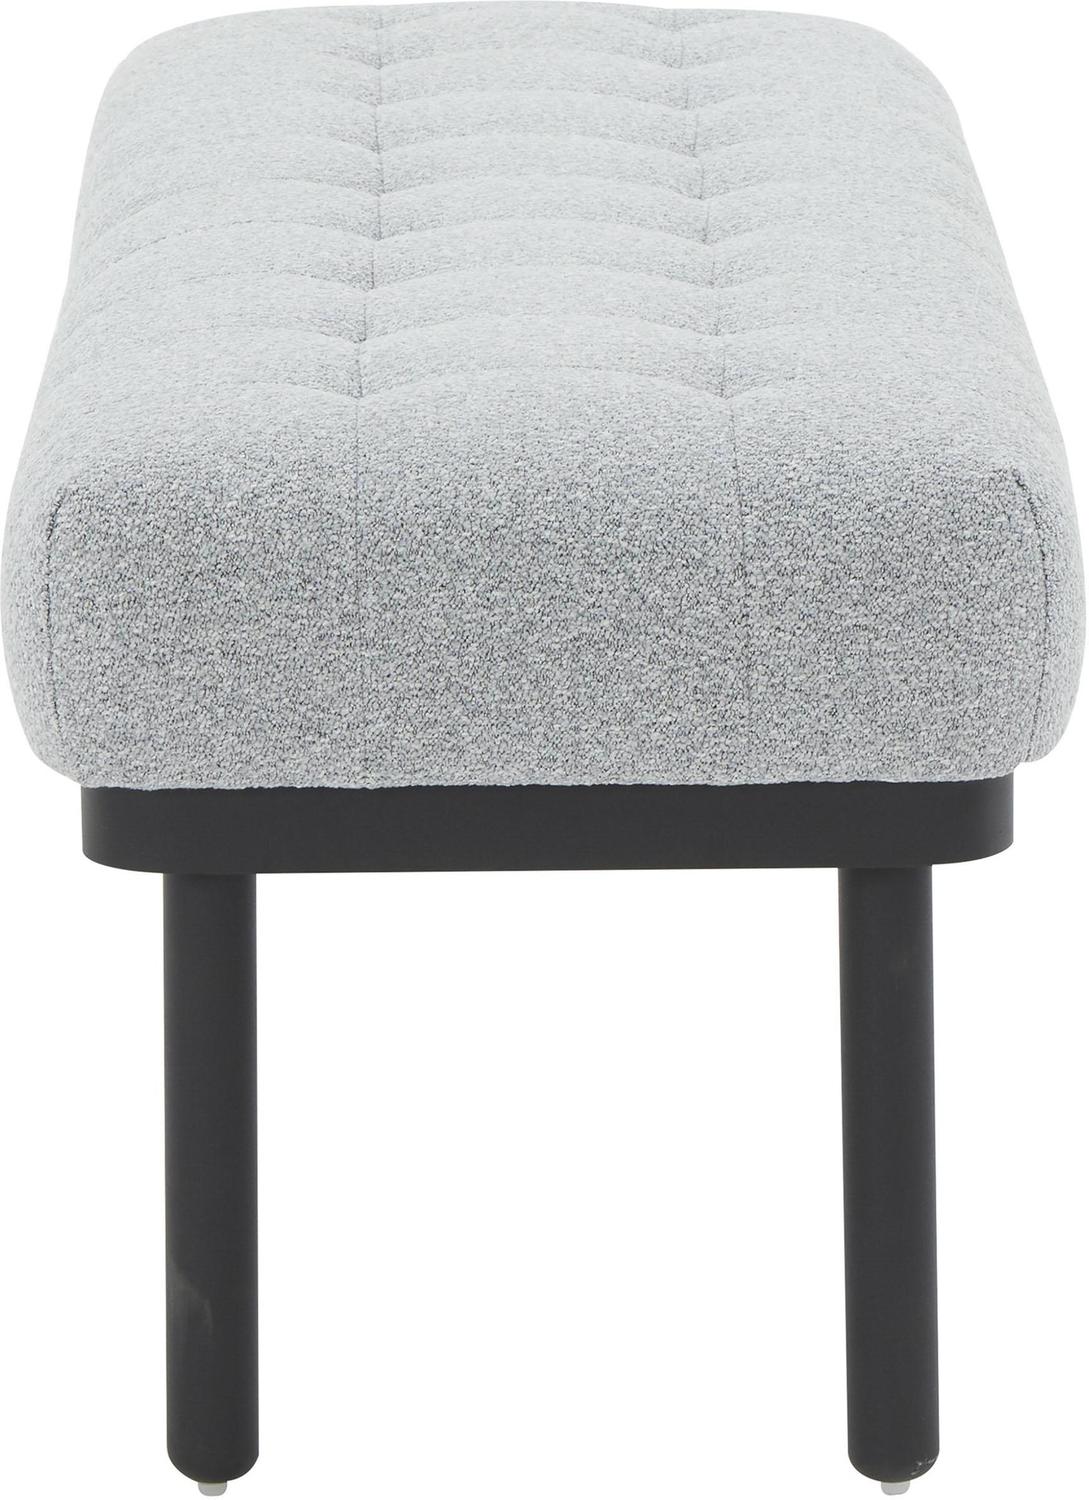 upholstered accent bench Tov Furniture Benches Grey